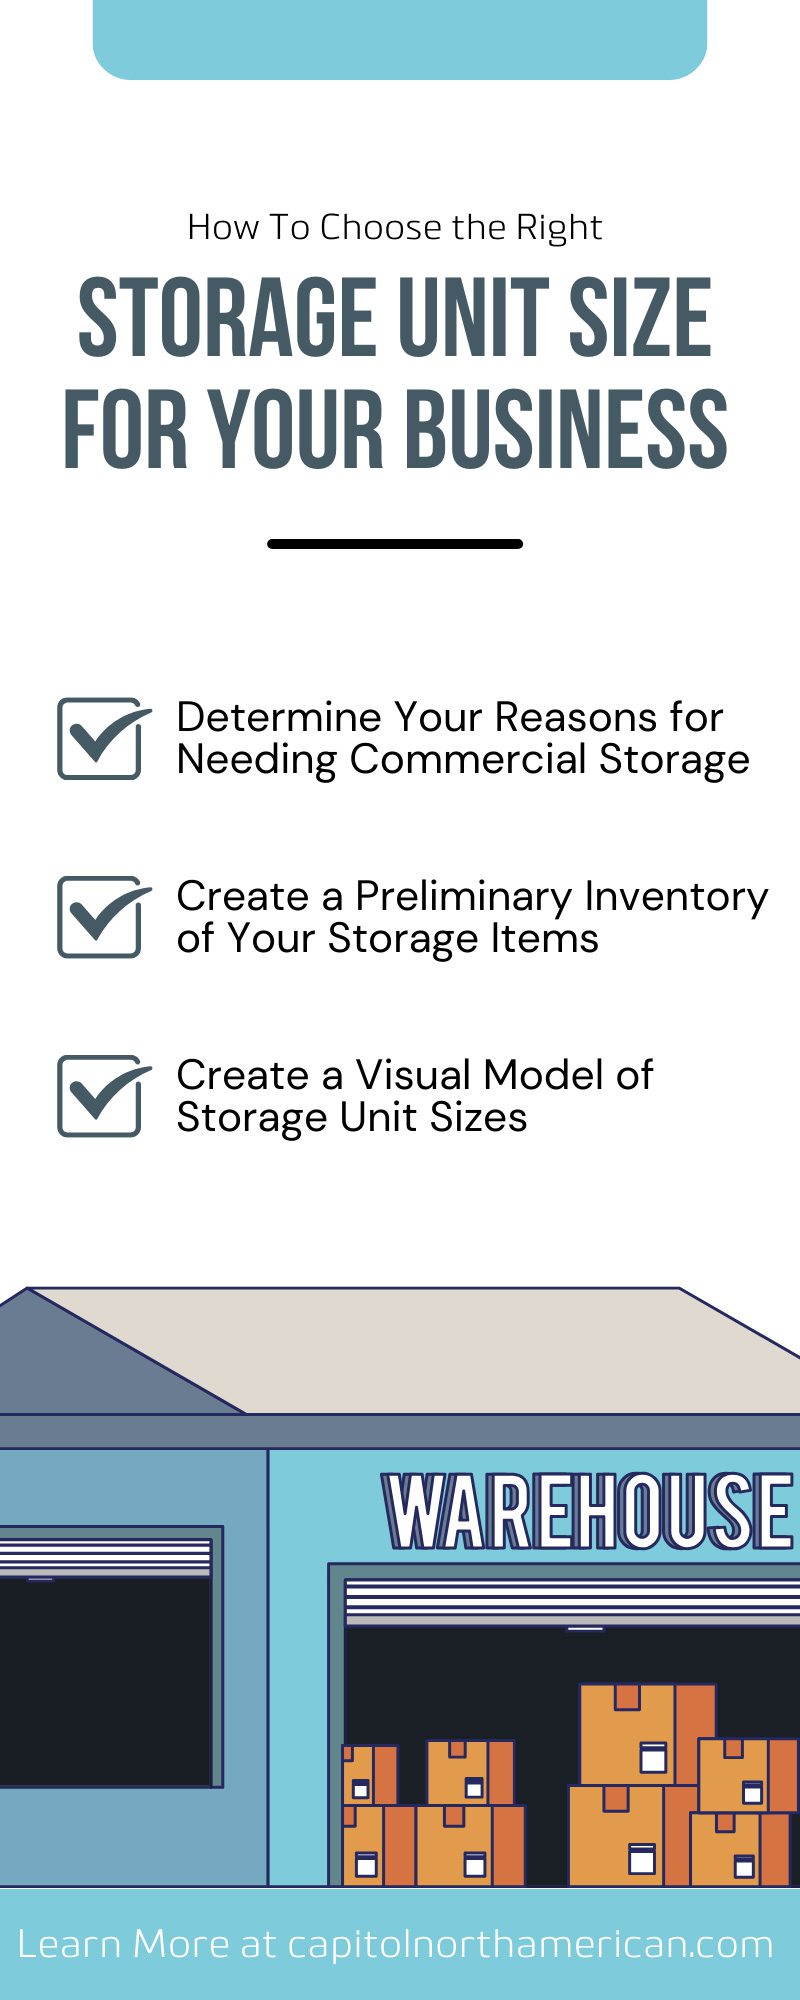 How To Choose the Right Storage Unit Size for Your Business
